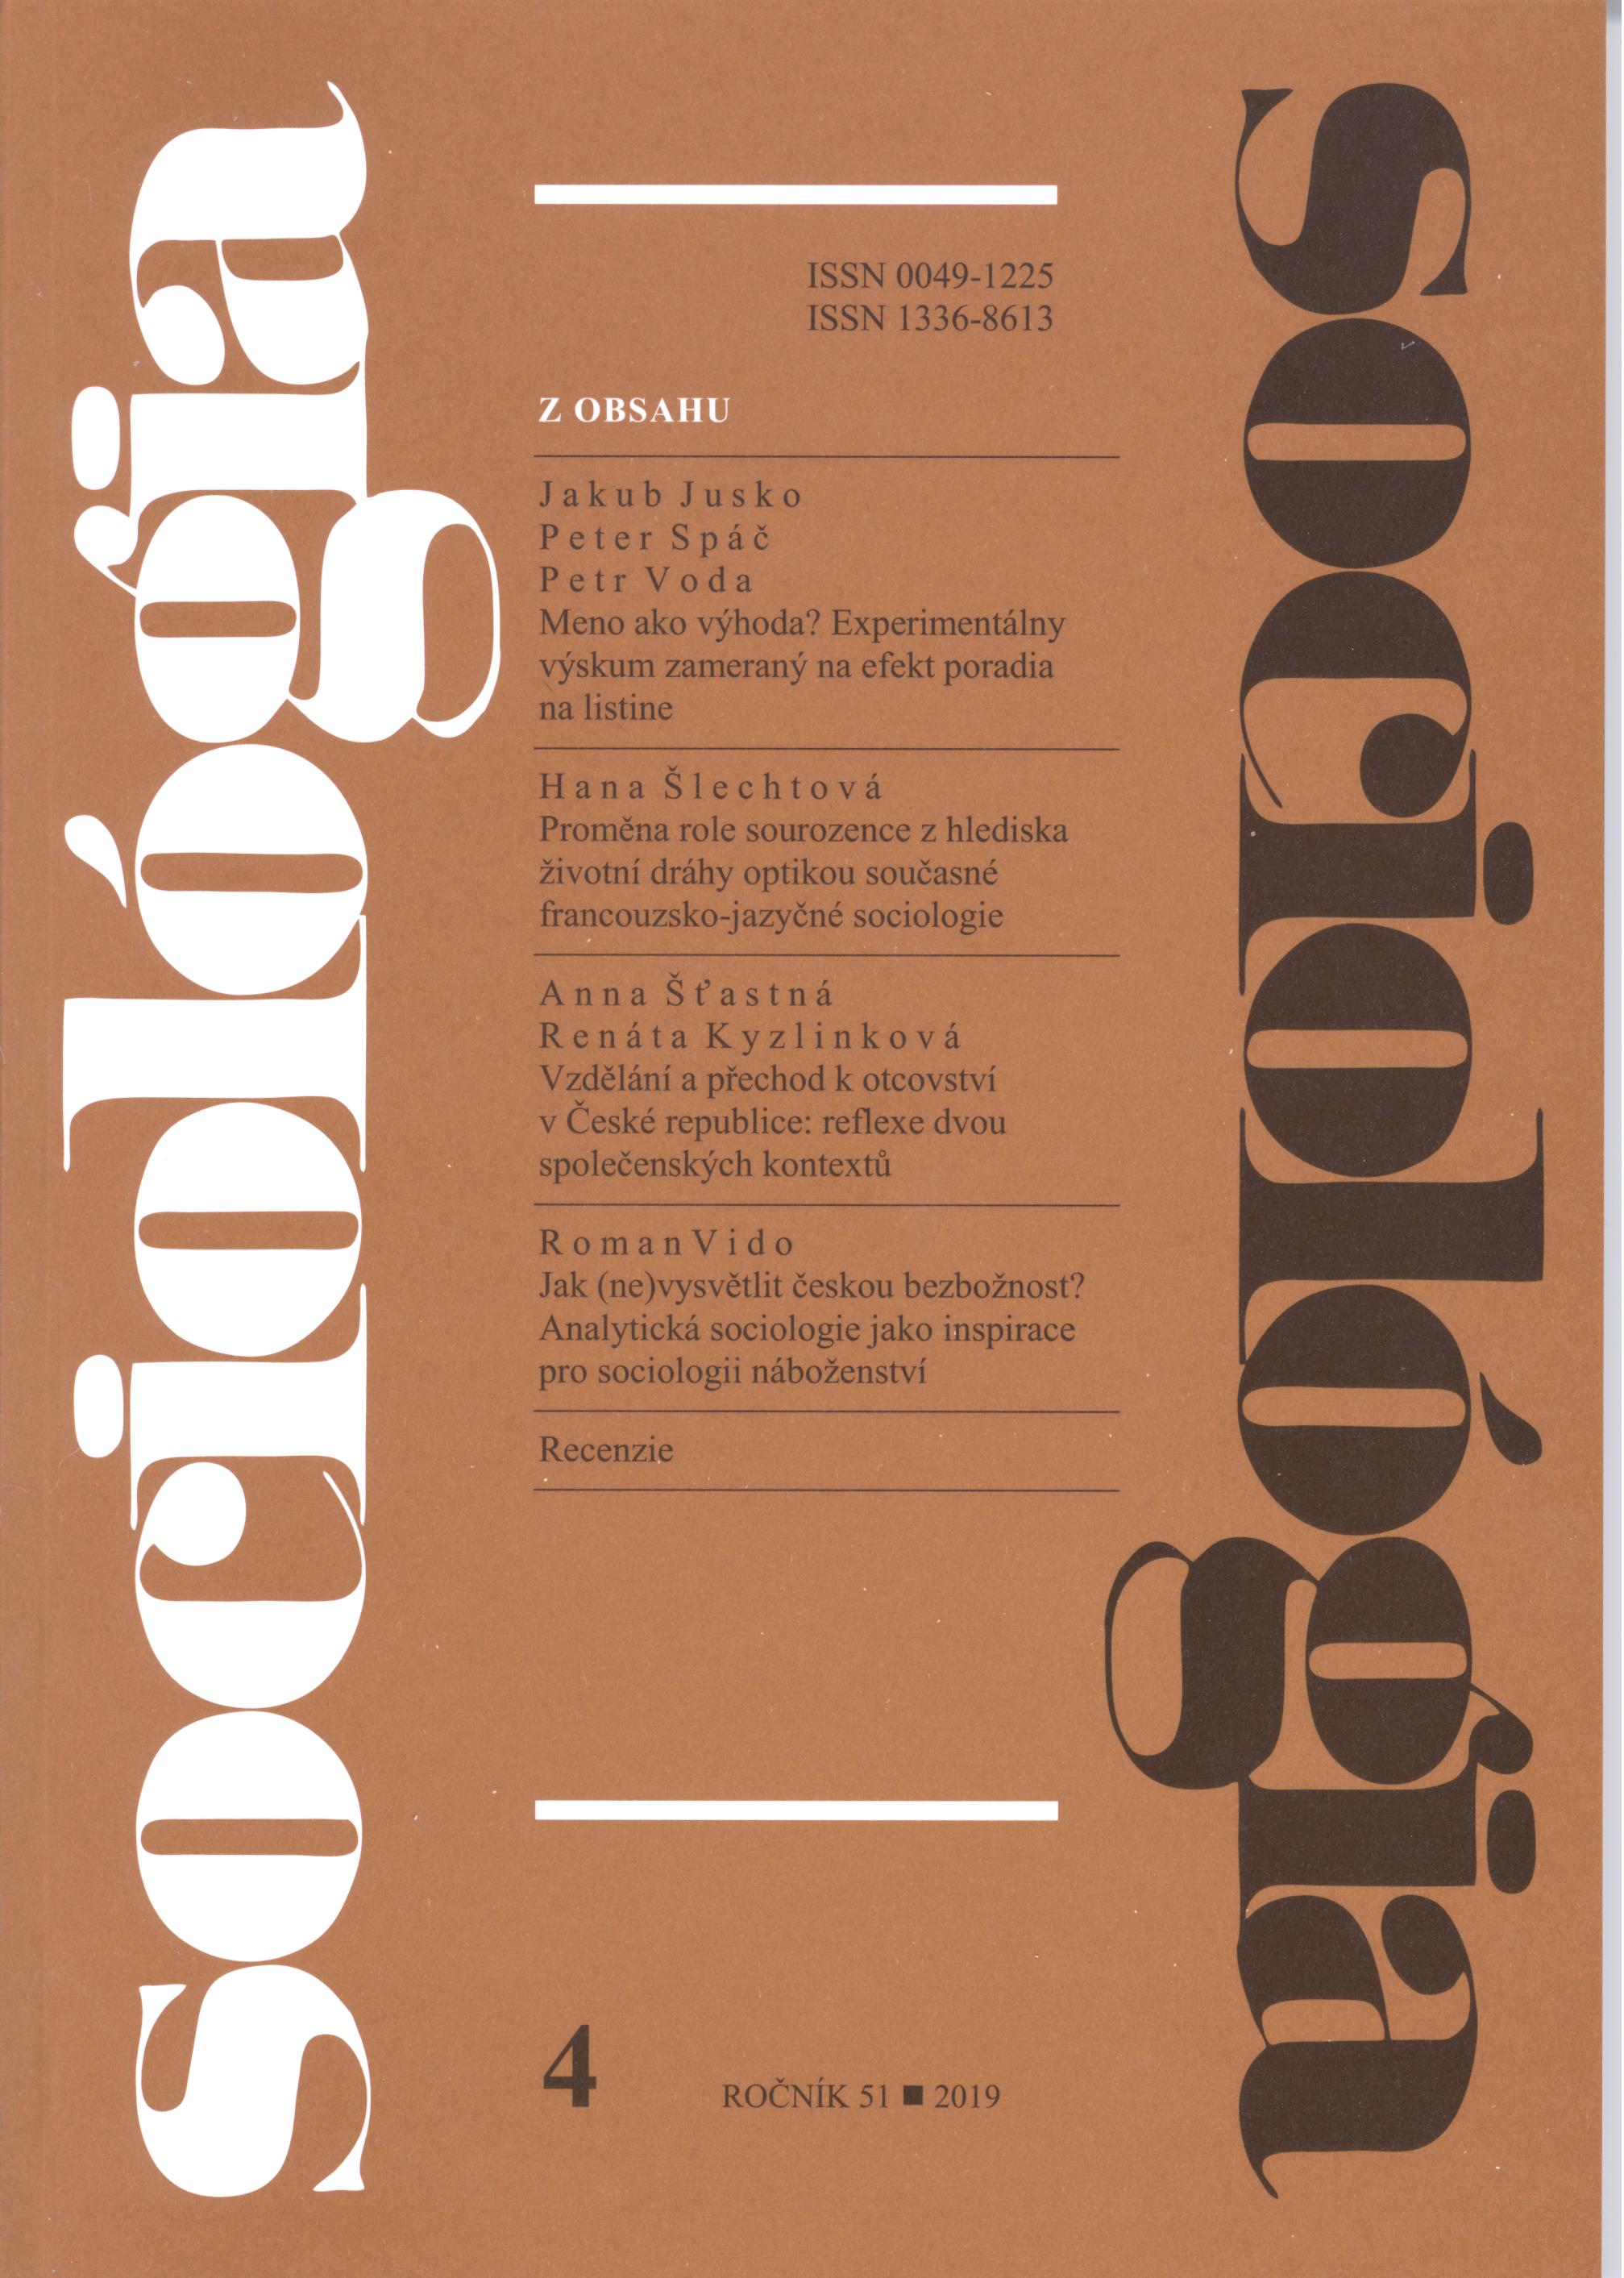 Variation of the Sibling’s Social Role from the Life Course Perspective through the Lens of Contemporary French-Language Sociology Cover Image